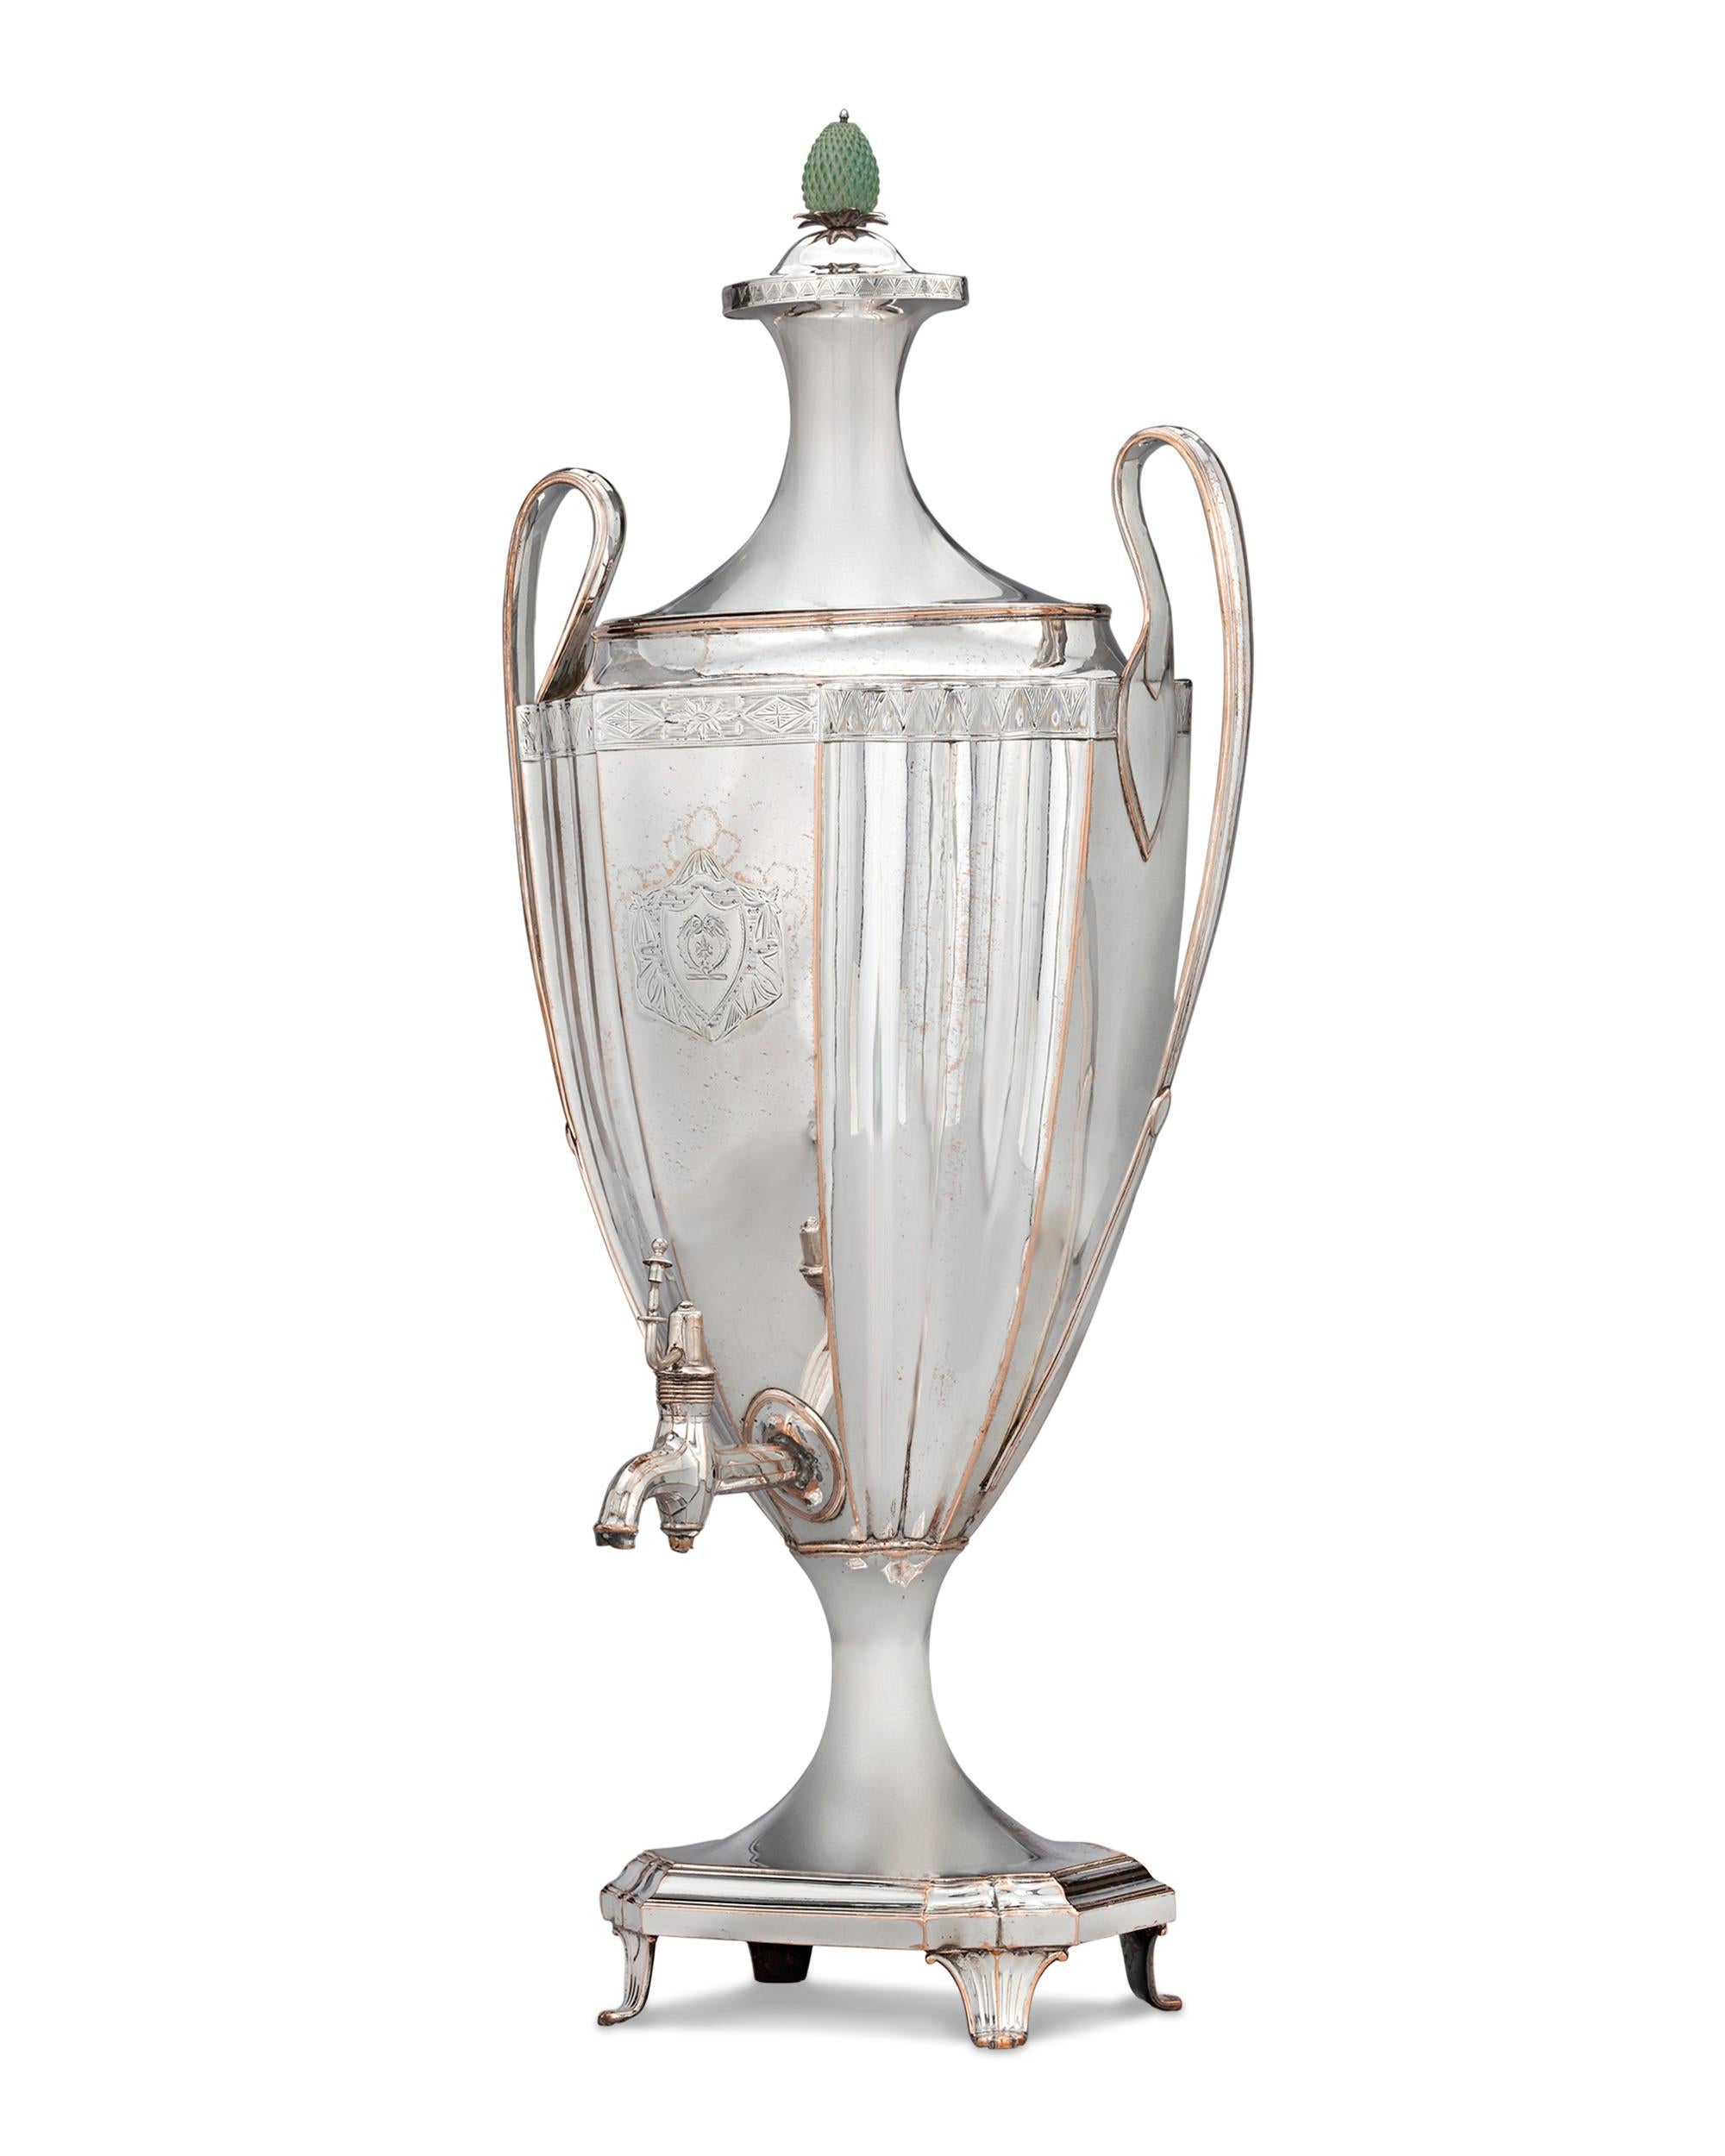 This exceptional English silverplate tea urn is the perfect accessory for serving tea, coffee or hot water. The piece exhibits all the hallmarks of the Neoclassical style, from the acorn finial to the stunning fluting and engraved crest on the